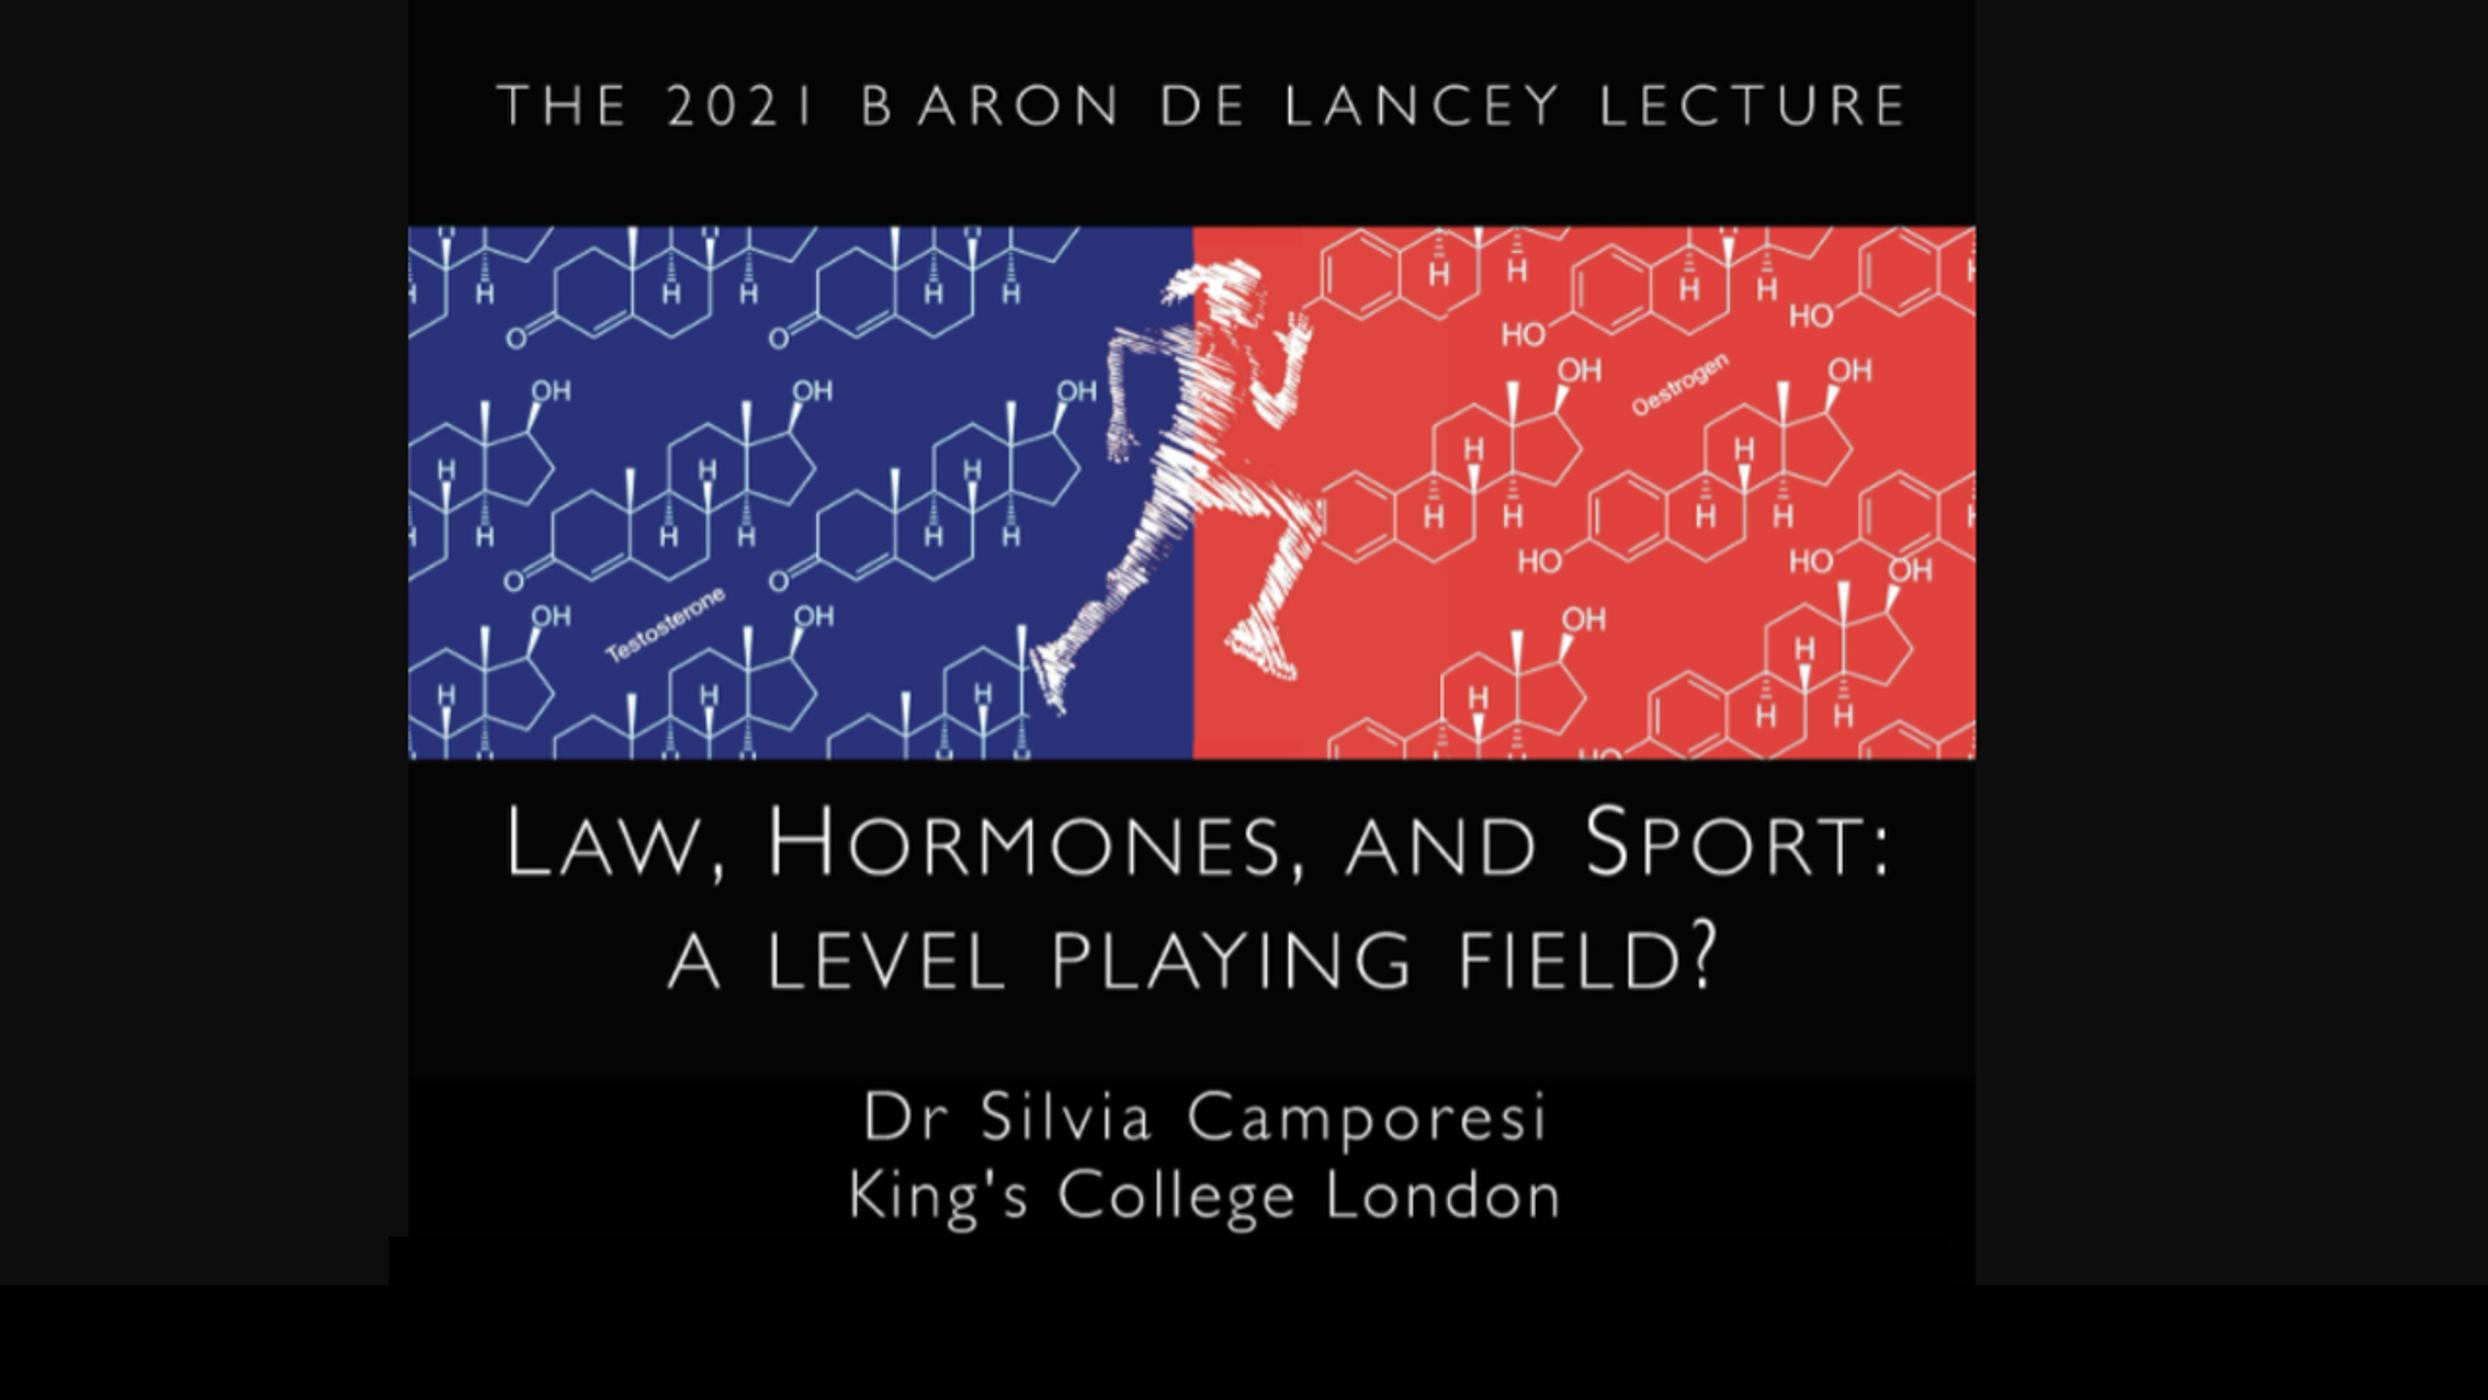 ’Law, Hormones, and Sport: a level playing field?’: The Baron Ver Heyden de Lancey Lecture 2021